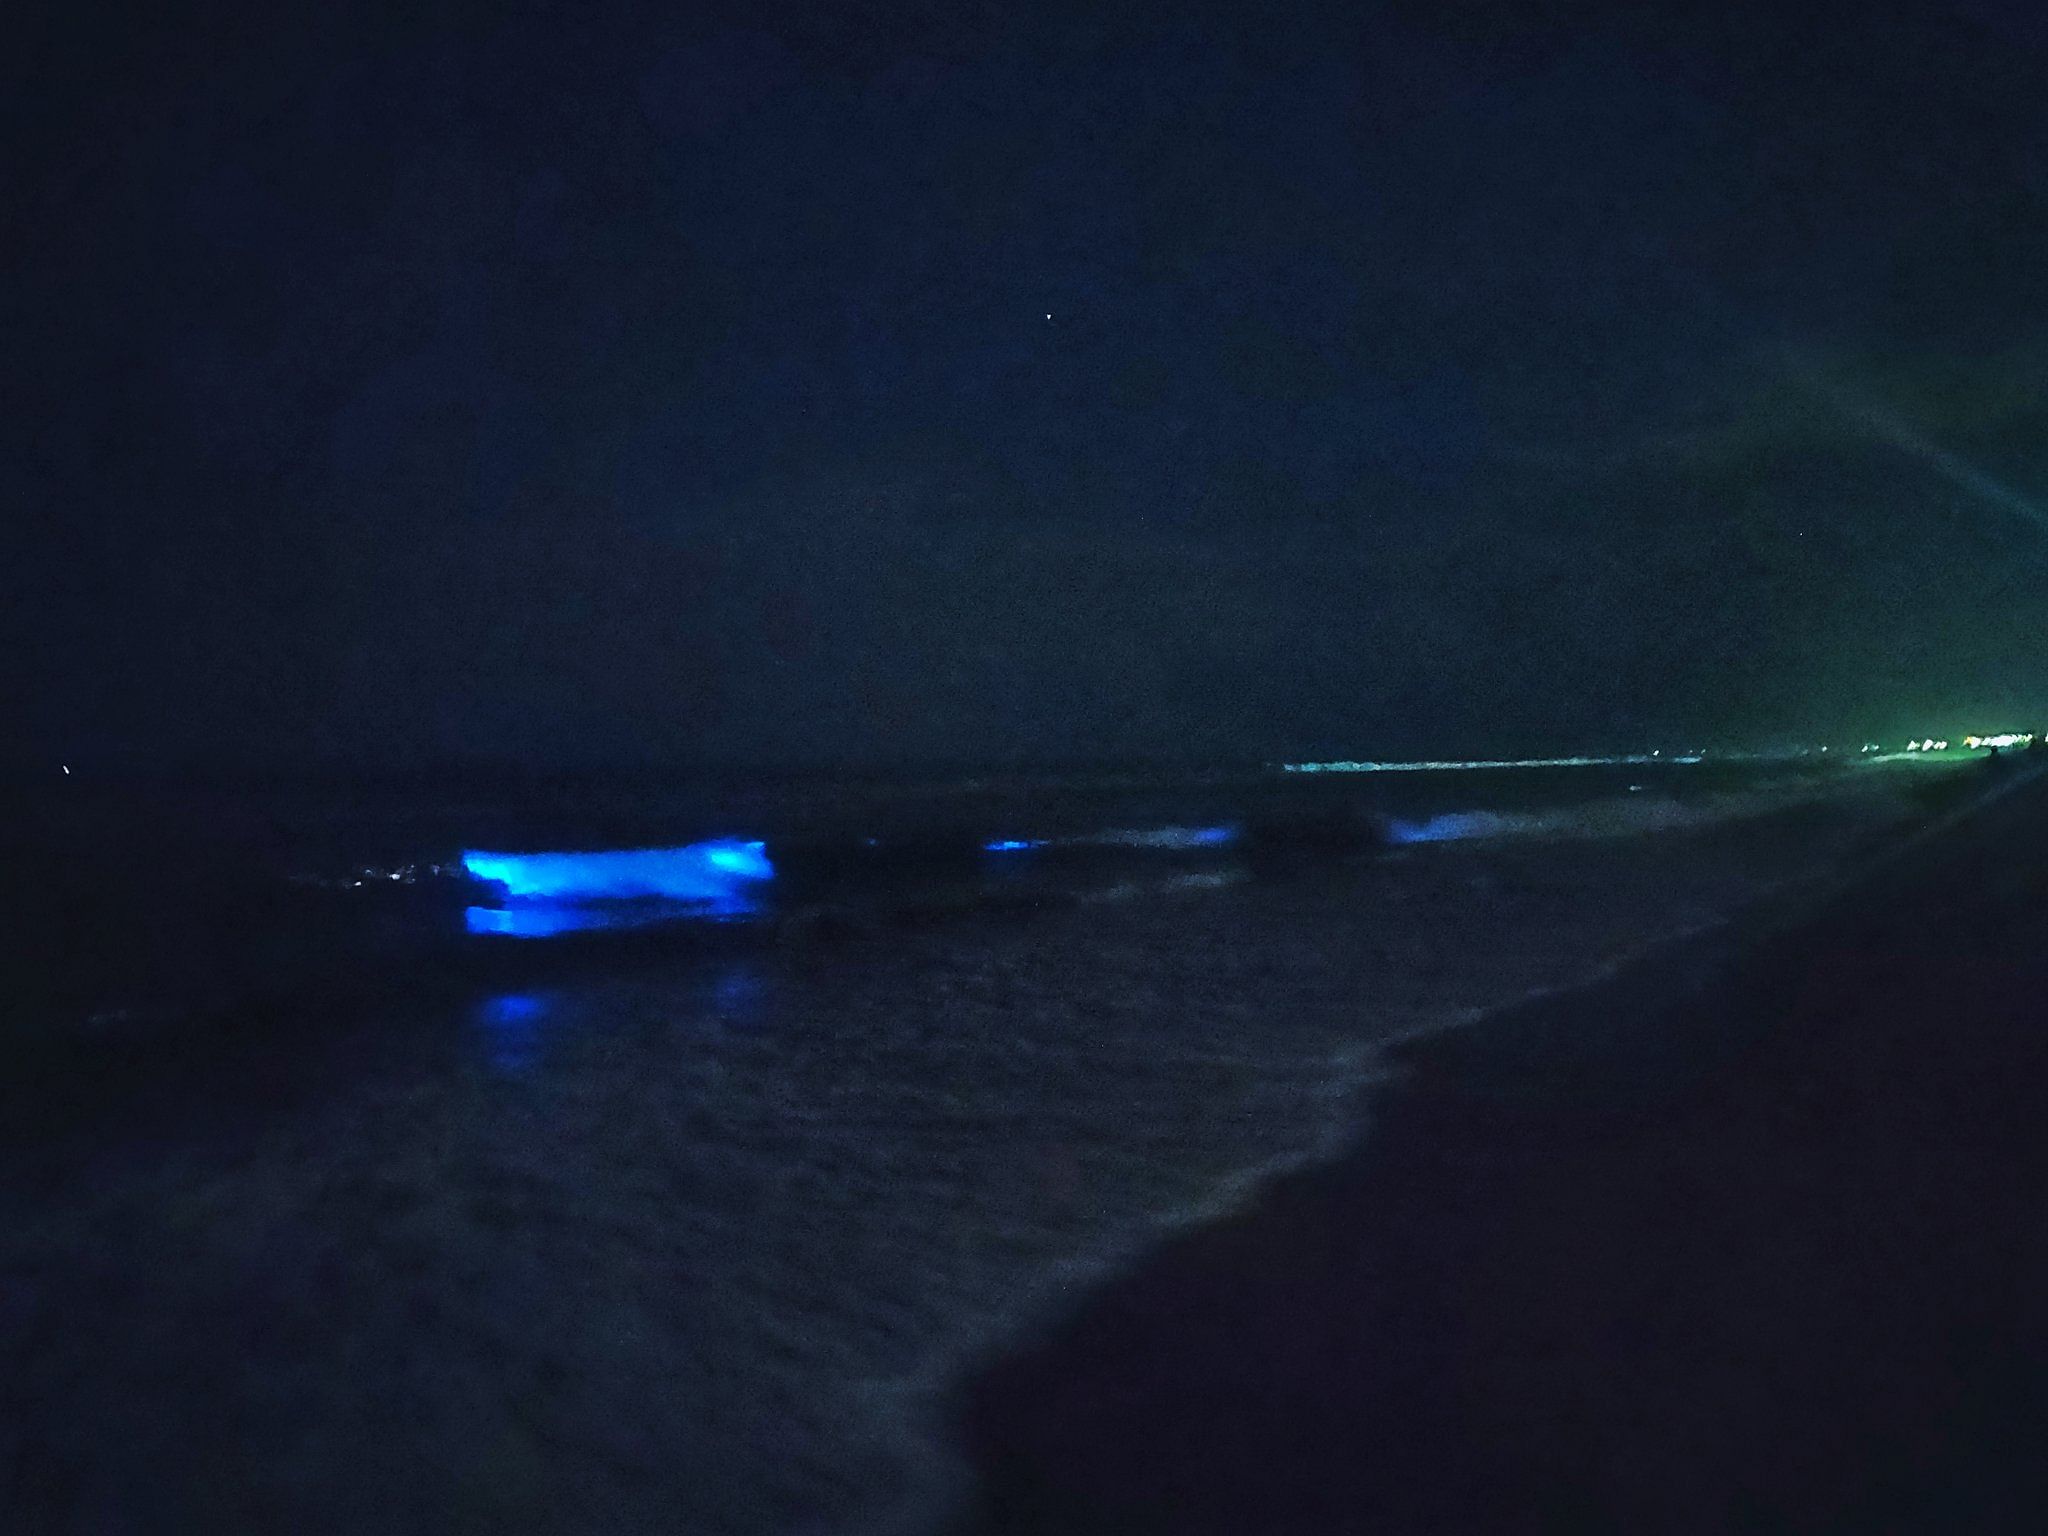 Thousands of people were elated over bioluminescent waves being spotted along the Chennai coast. (Photo Twitter/Ajay Shyam (@ajaw_))